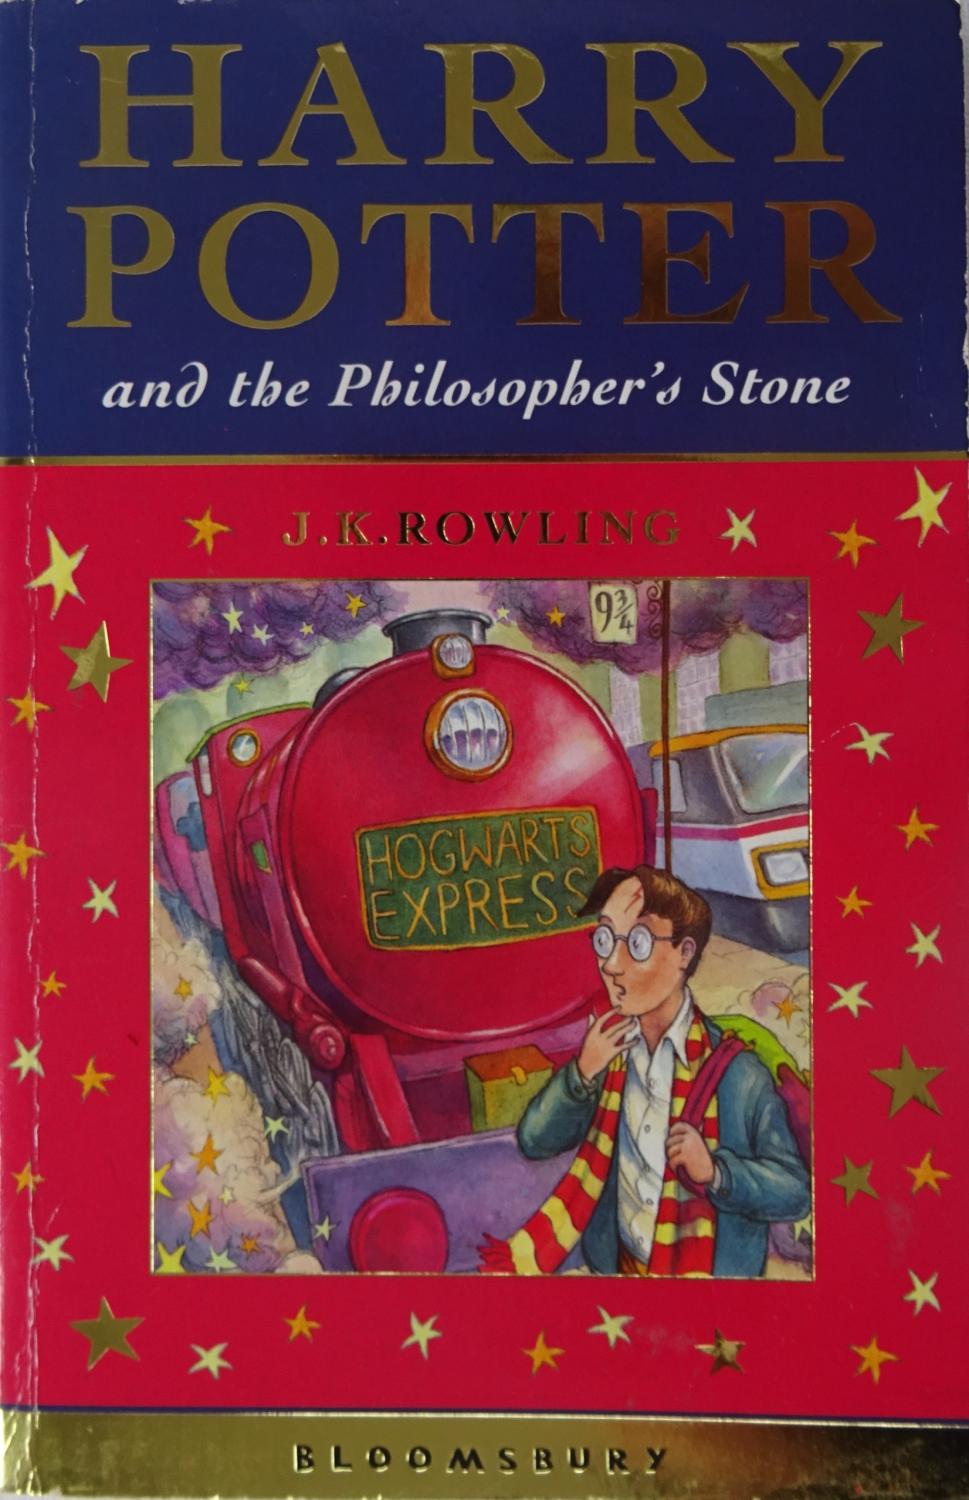 review on the book harry potter and the philosopher's stone